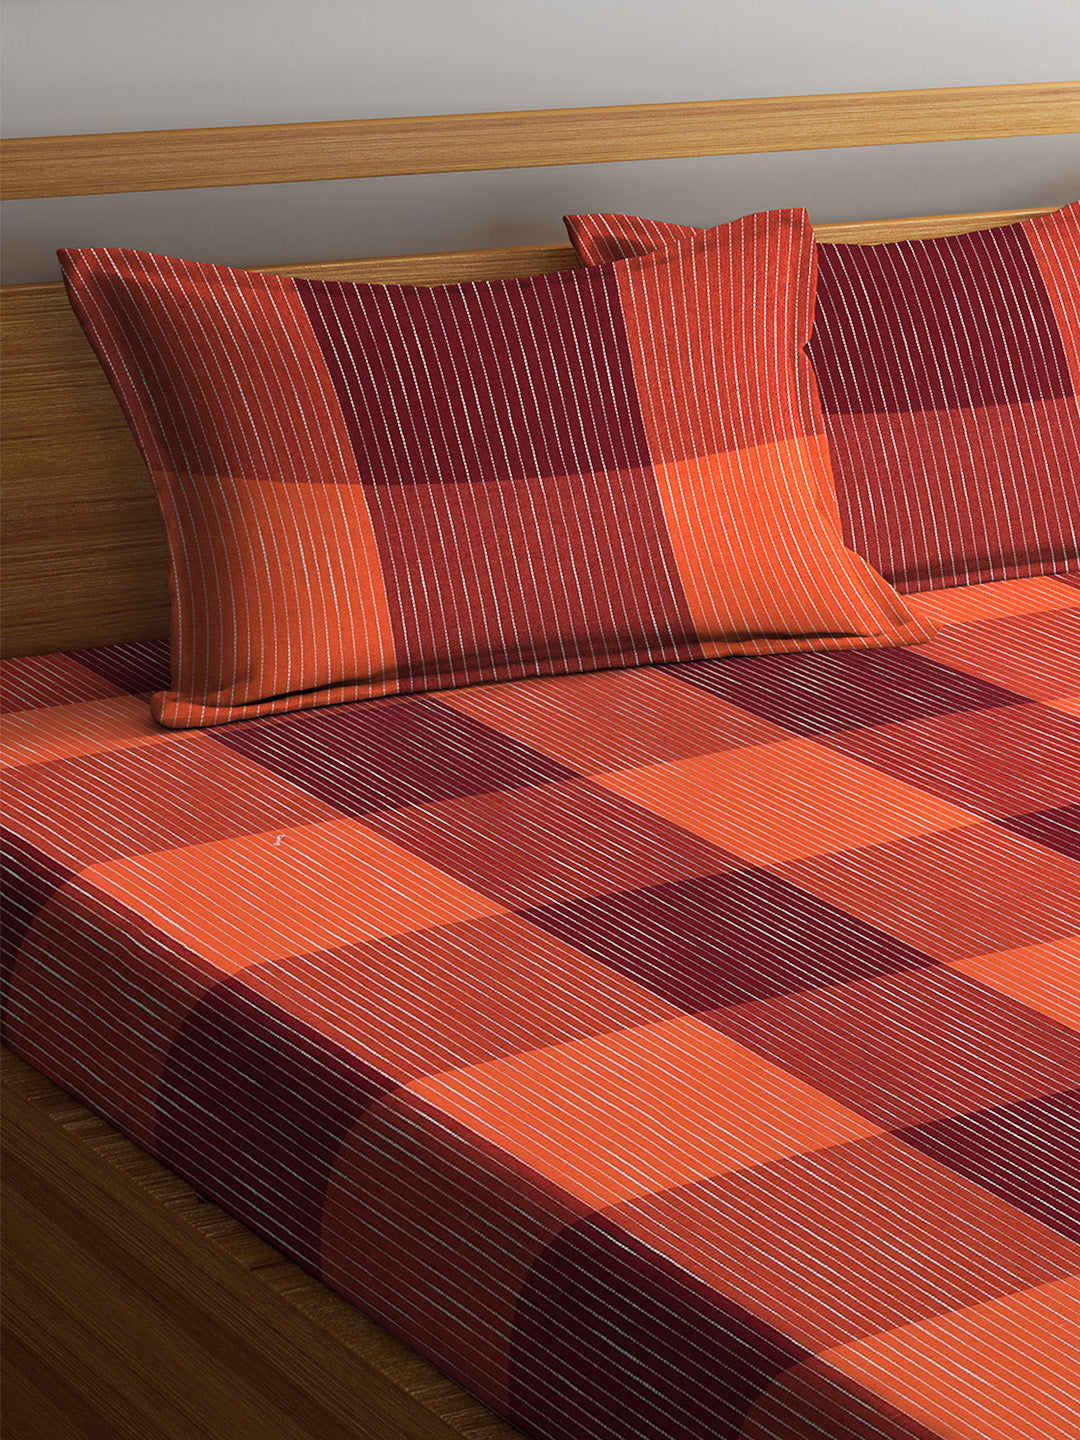 Arrabi Red Check Handwoven Cotton Double King Size Bedsheet with 2 Pillow Covers (260 x 260 cm)